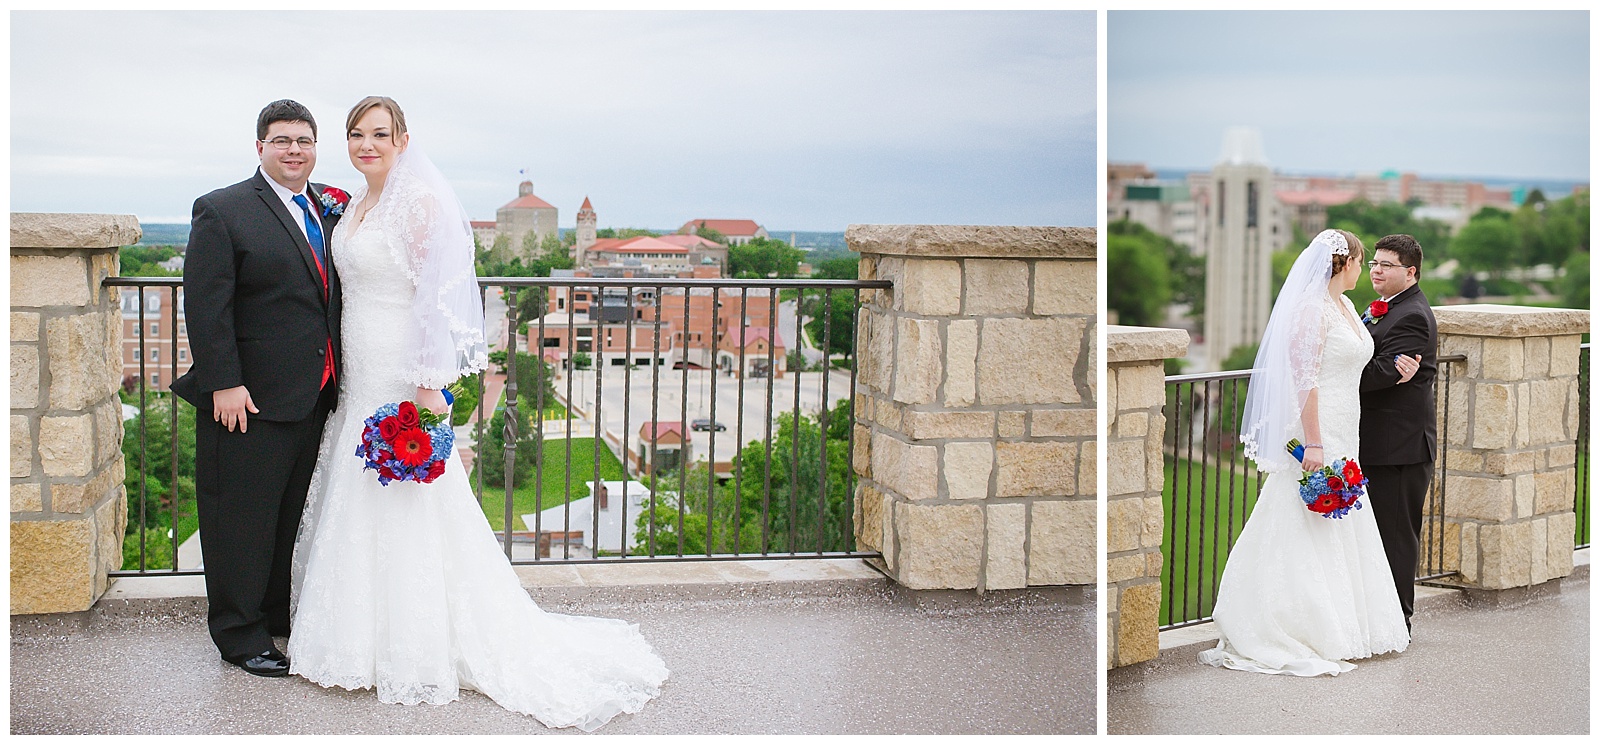 Wedding photography at The Oread in Lawrence, Kansas.